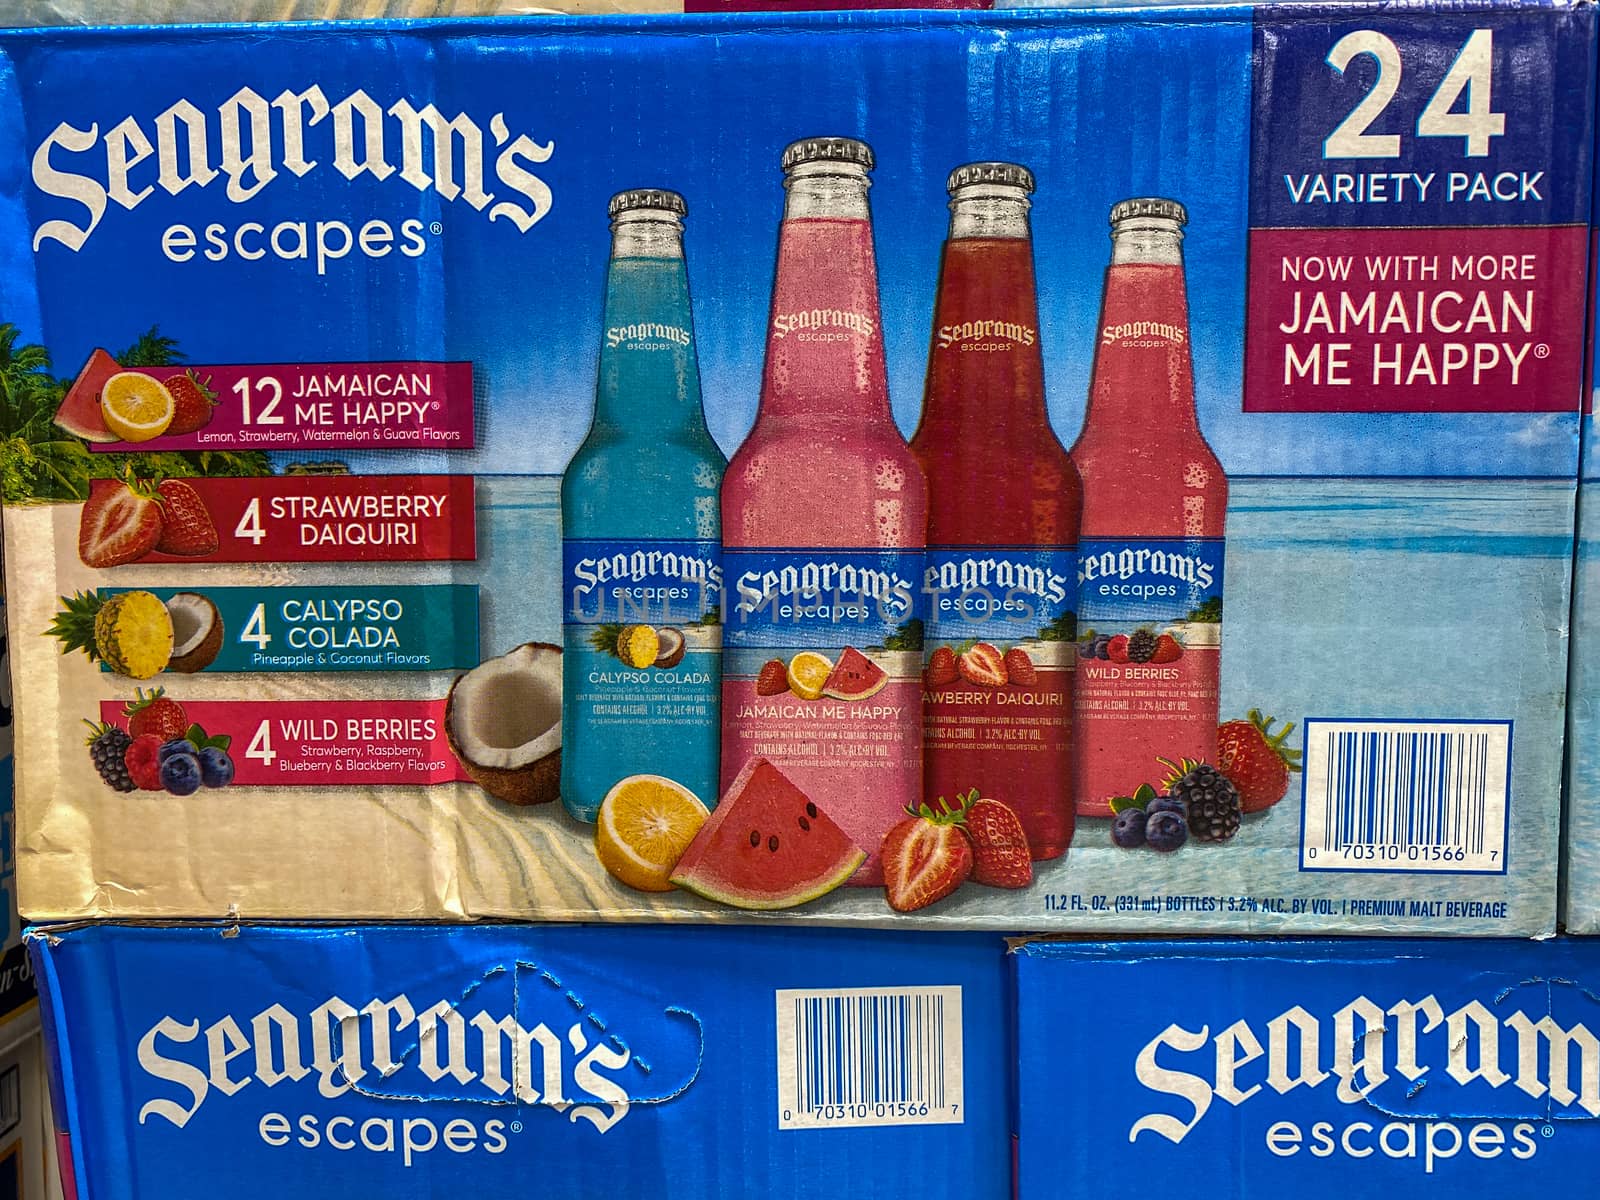 Cases of bottles or Seagrams Wine Coolers at a Sams Club grocery by Jshanebutt